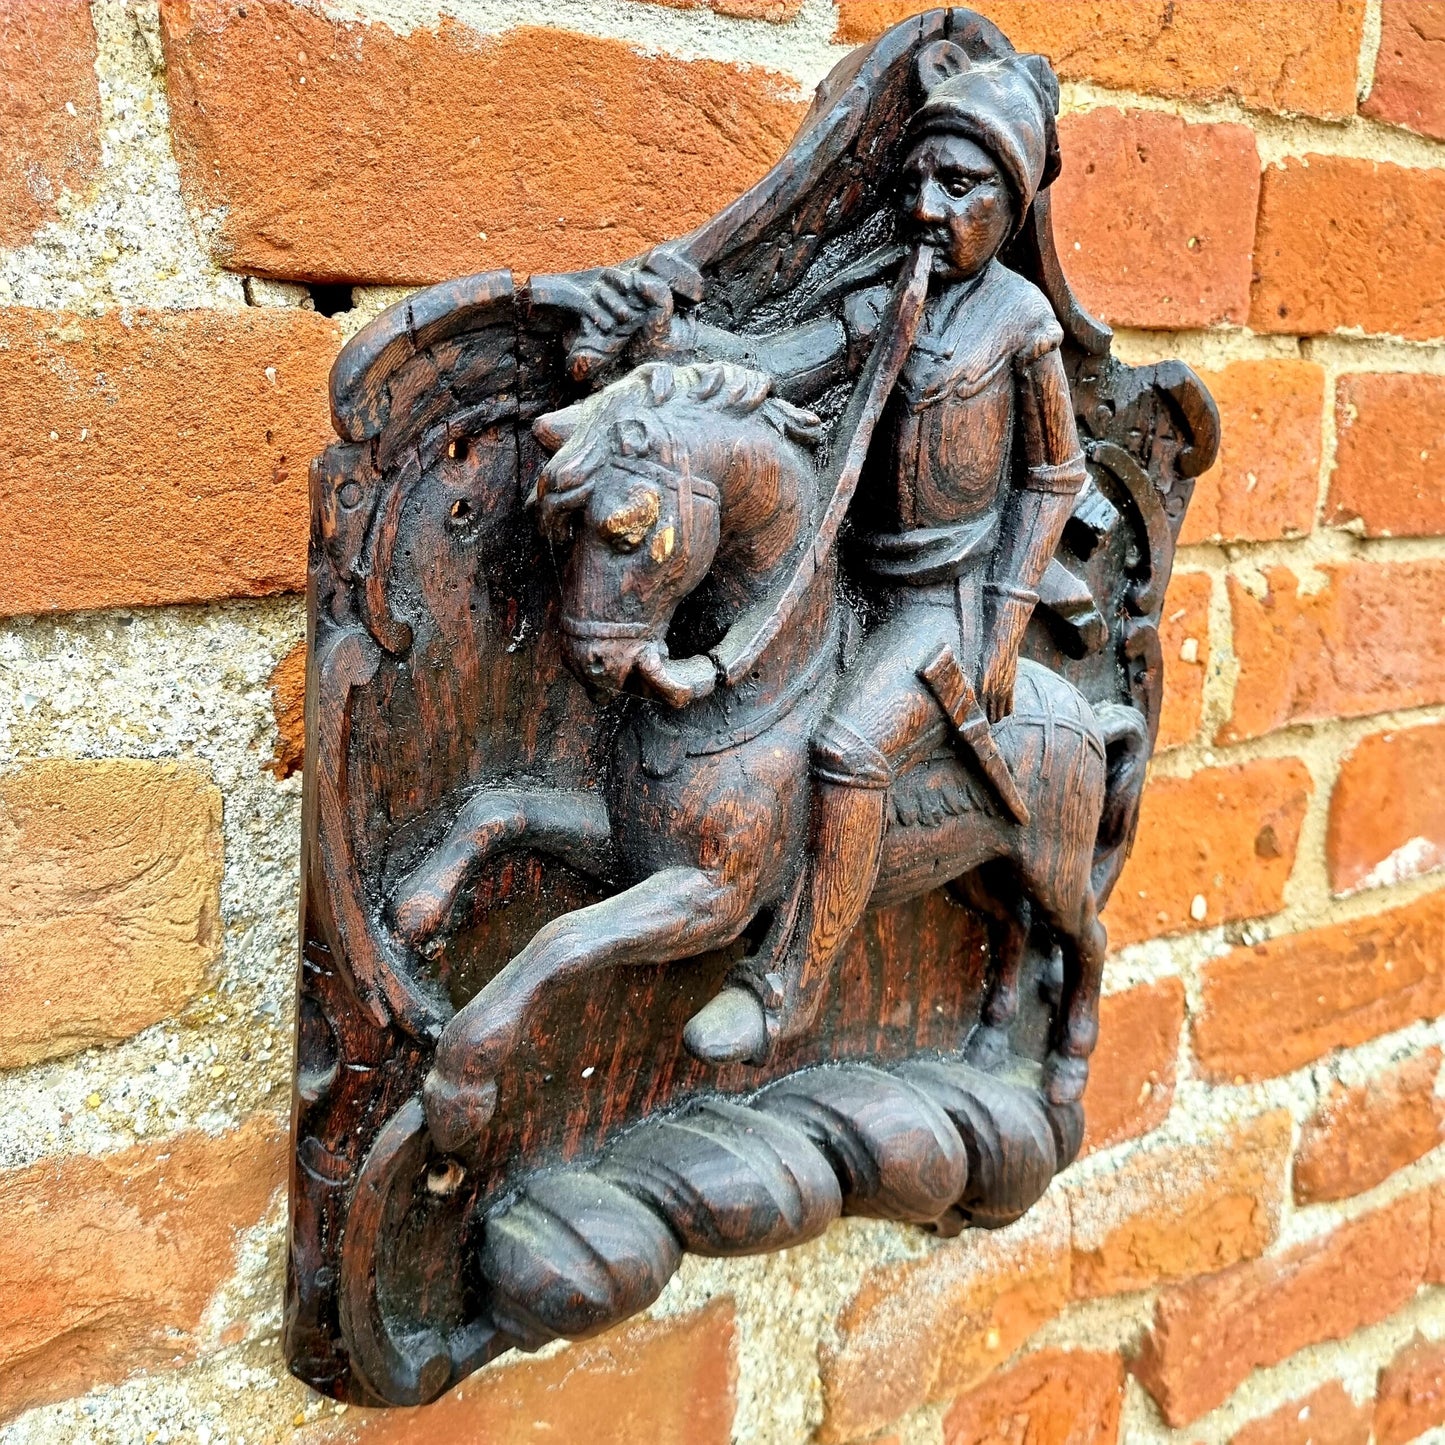 Late 18thC / Early 19thC English Antique Wood Carving Depicting a Knight on Horseback